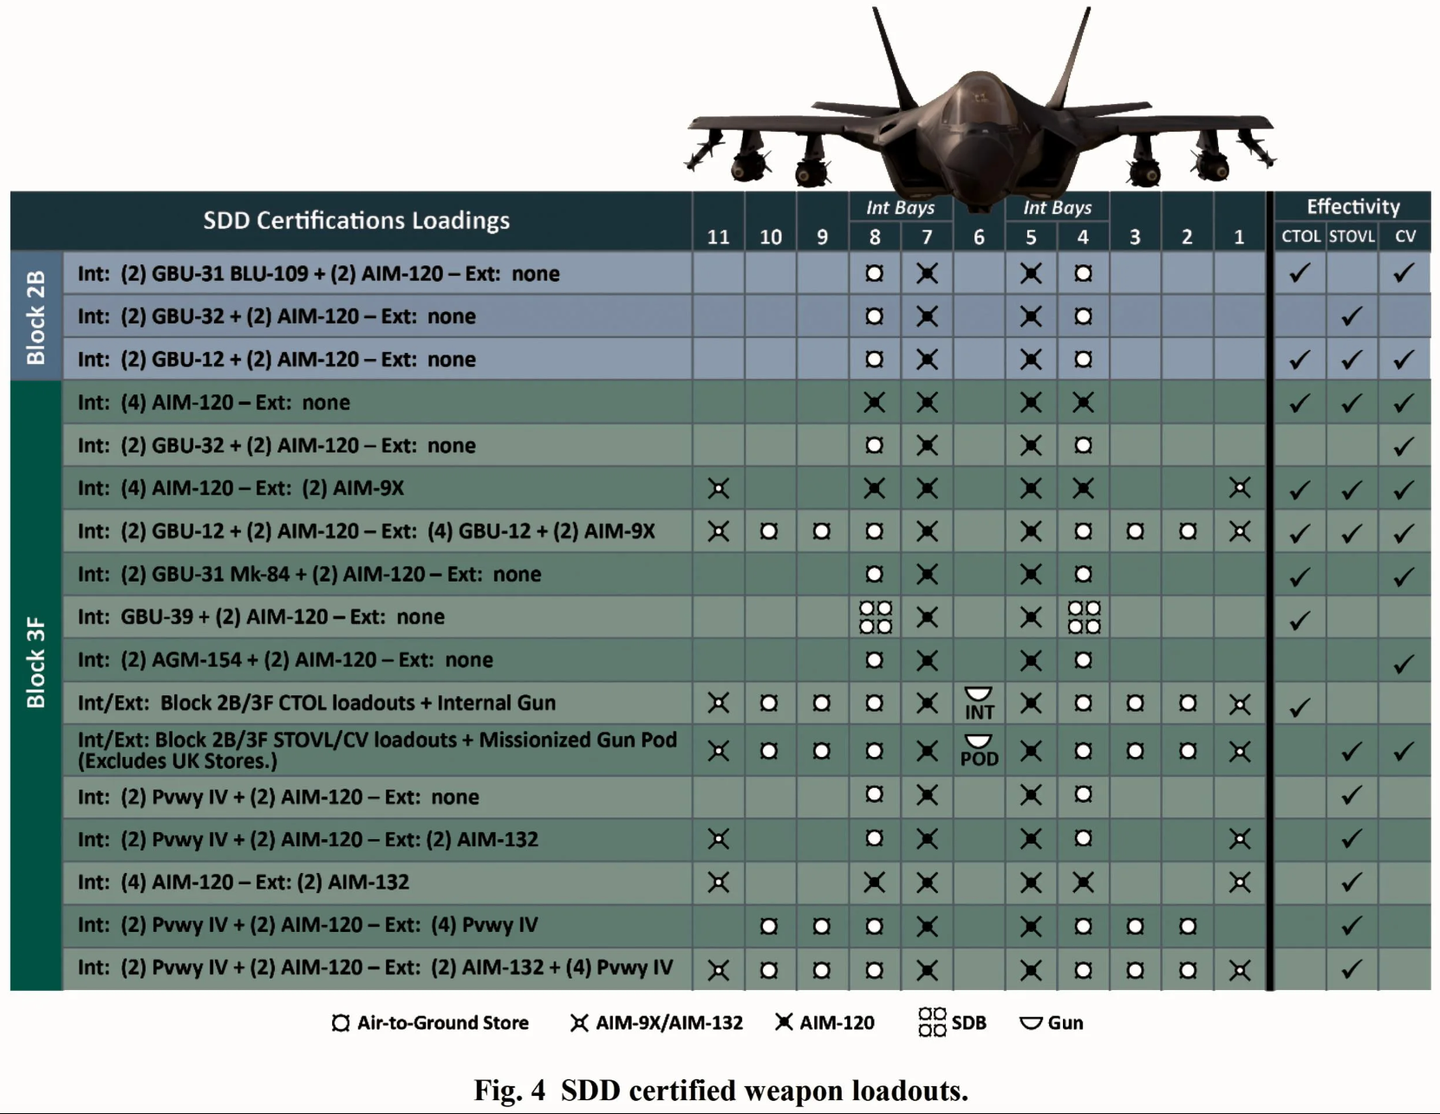 Weapon certification load-outs used during the F-35’s System Development and Demonstration phase. <em>F-35 JPO</em>